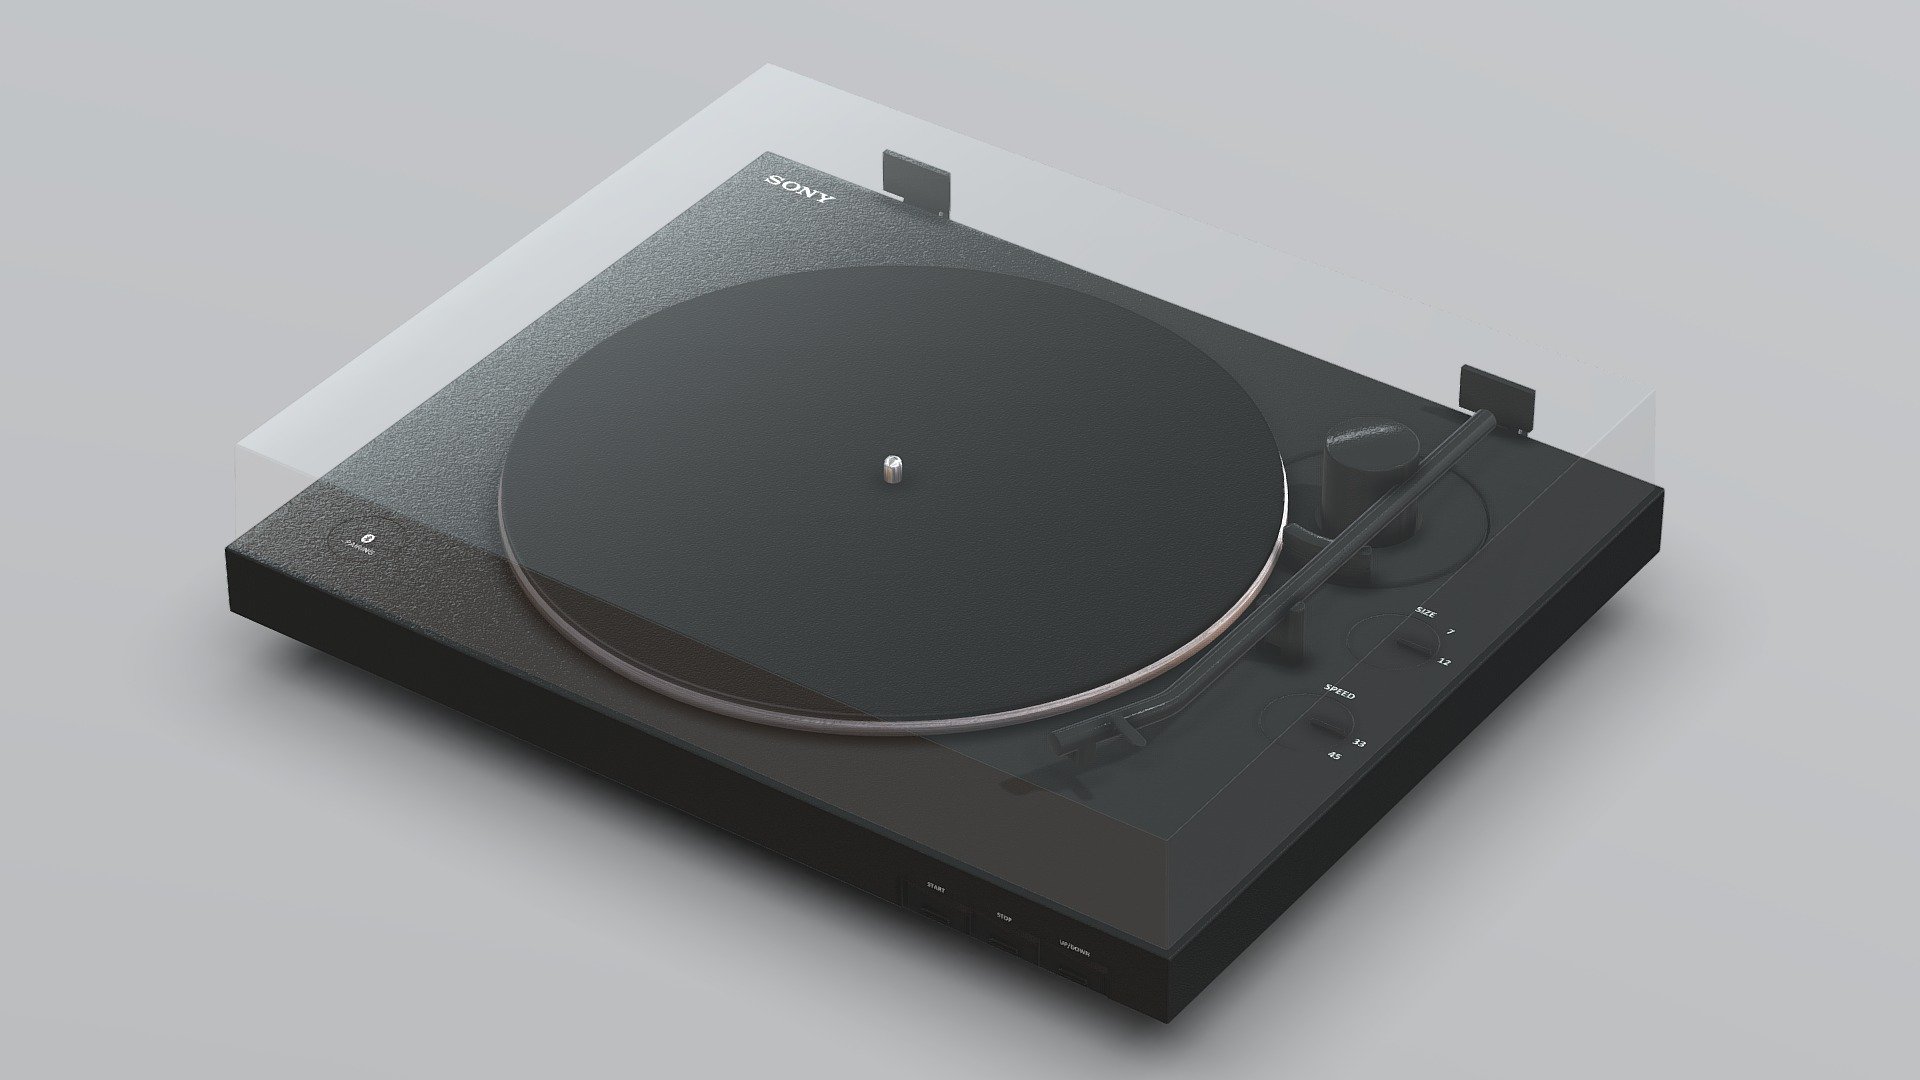 Sony PS-LX310BT turntable

Sony PS-LX310BT turntable 3D model



3D model of Sony's PS-LX310BT turntable, featuring Bluetooth connectivity for wireless audio streaming and a sleek, modern design.

realistic

close to original object

low poly model

textures - yes

materials - yes

realistic - yes


 - Sony PS-LX310BT turntable - Buy Royalty Free 3D model by D3DARTM 3d model